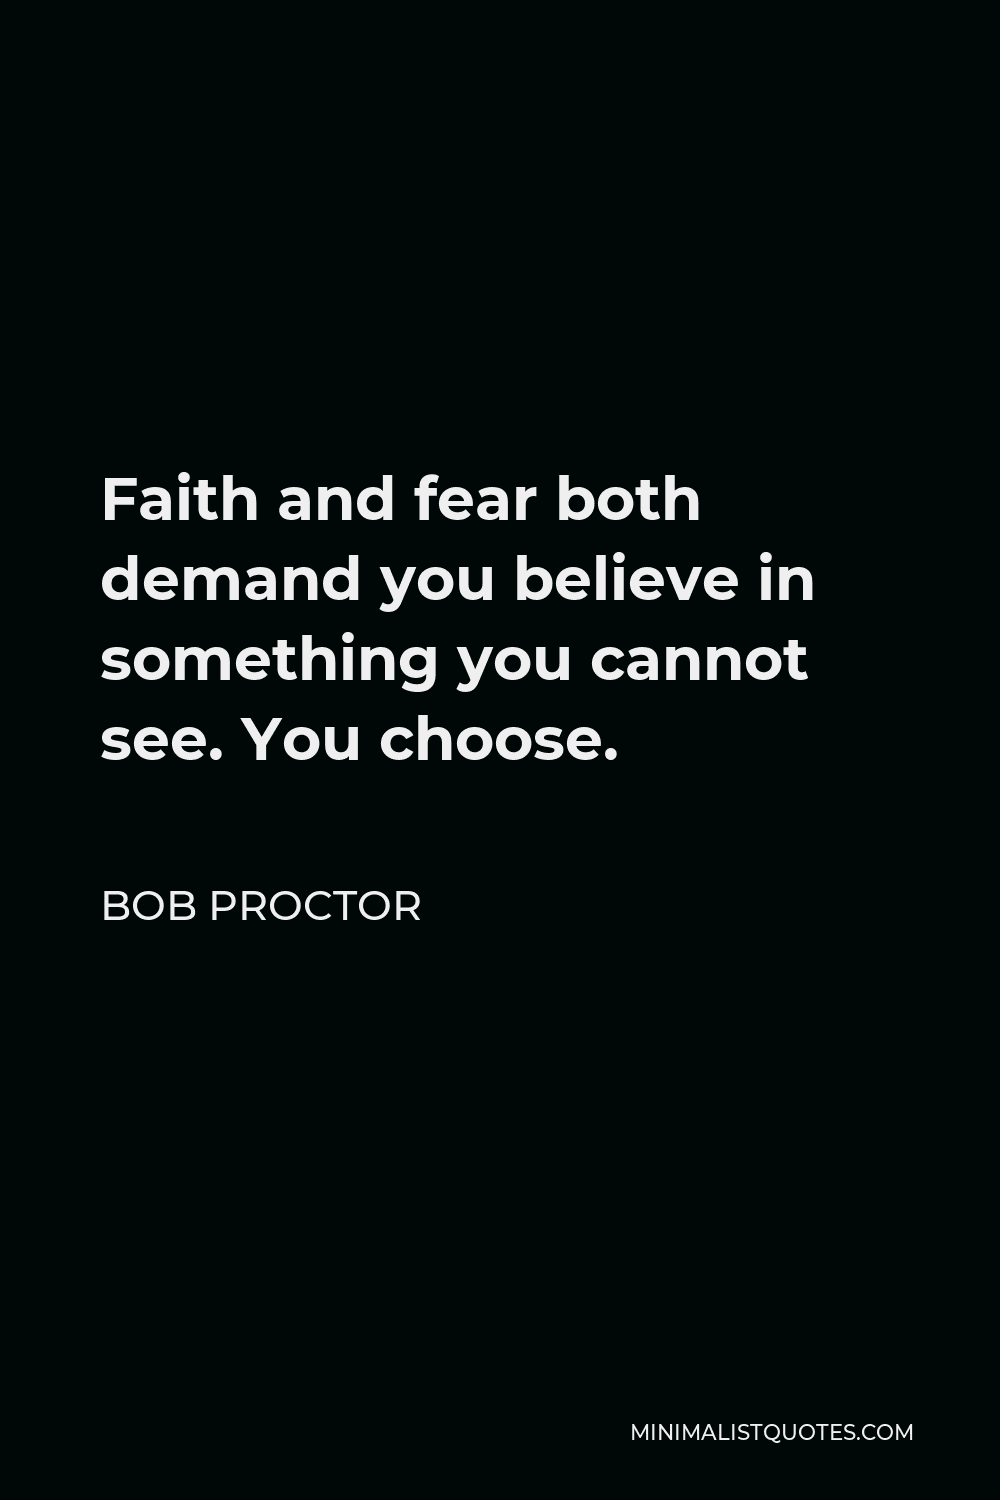 Bob Proctor Quote - Faith and fear both demand you believe in something you cannot see. You choose.